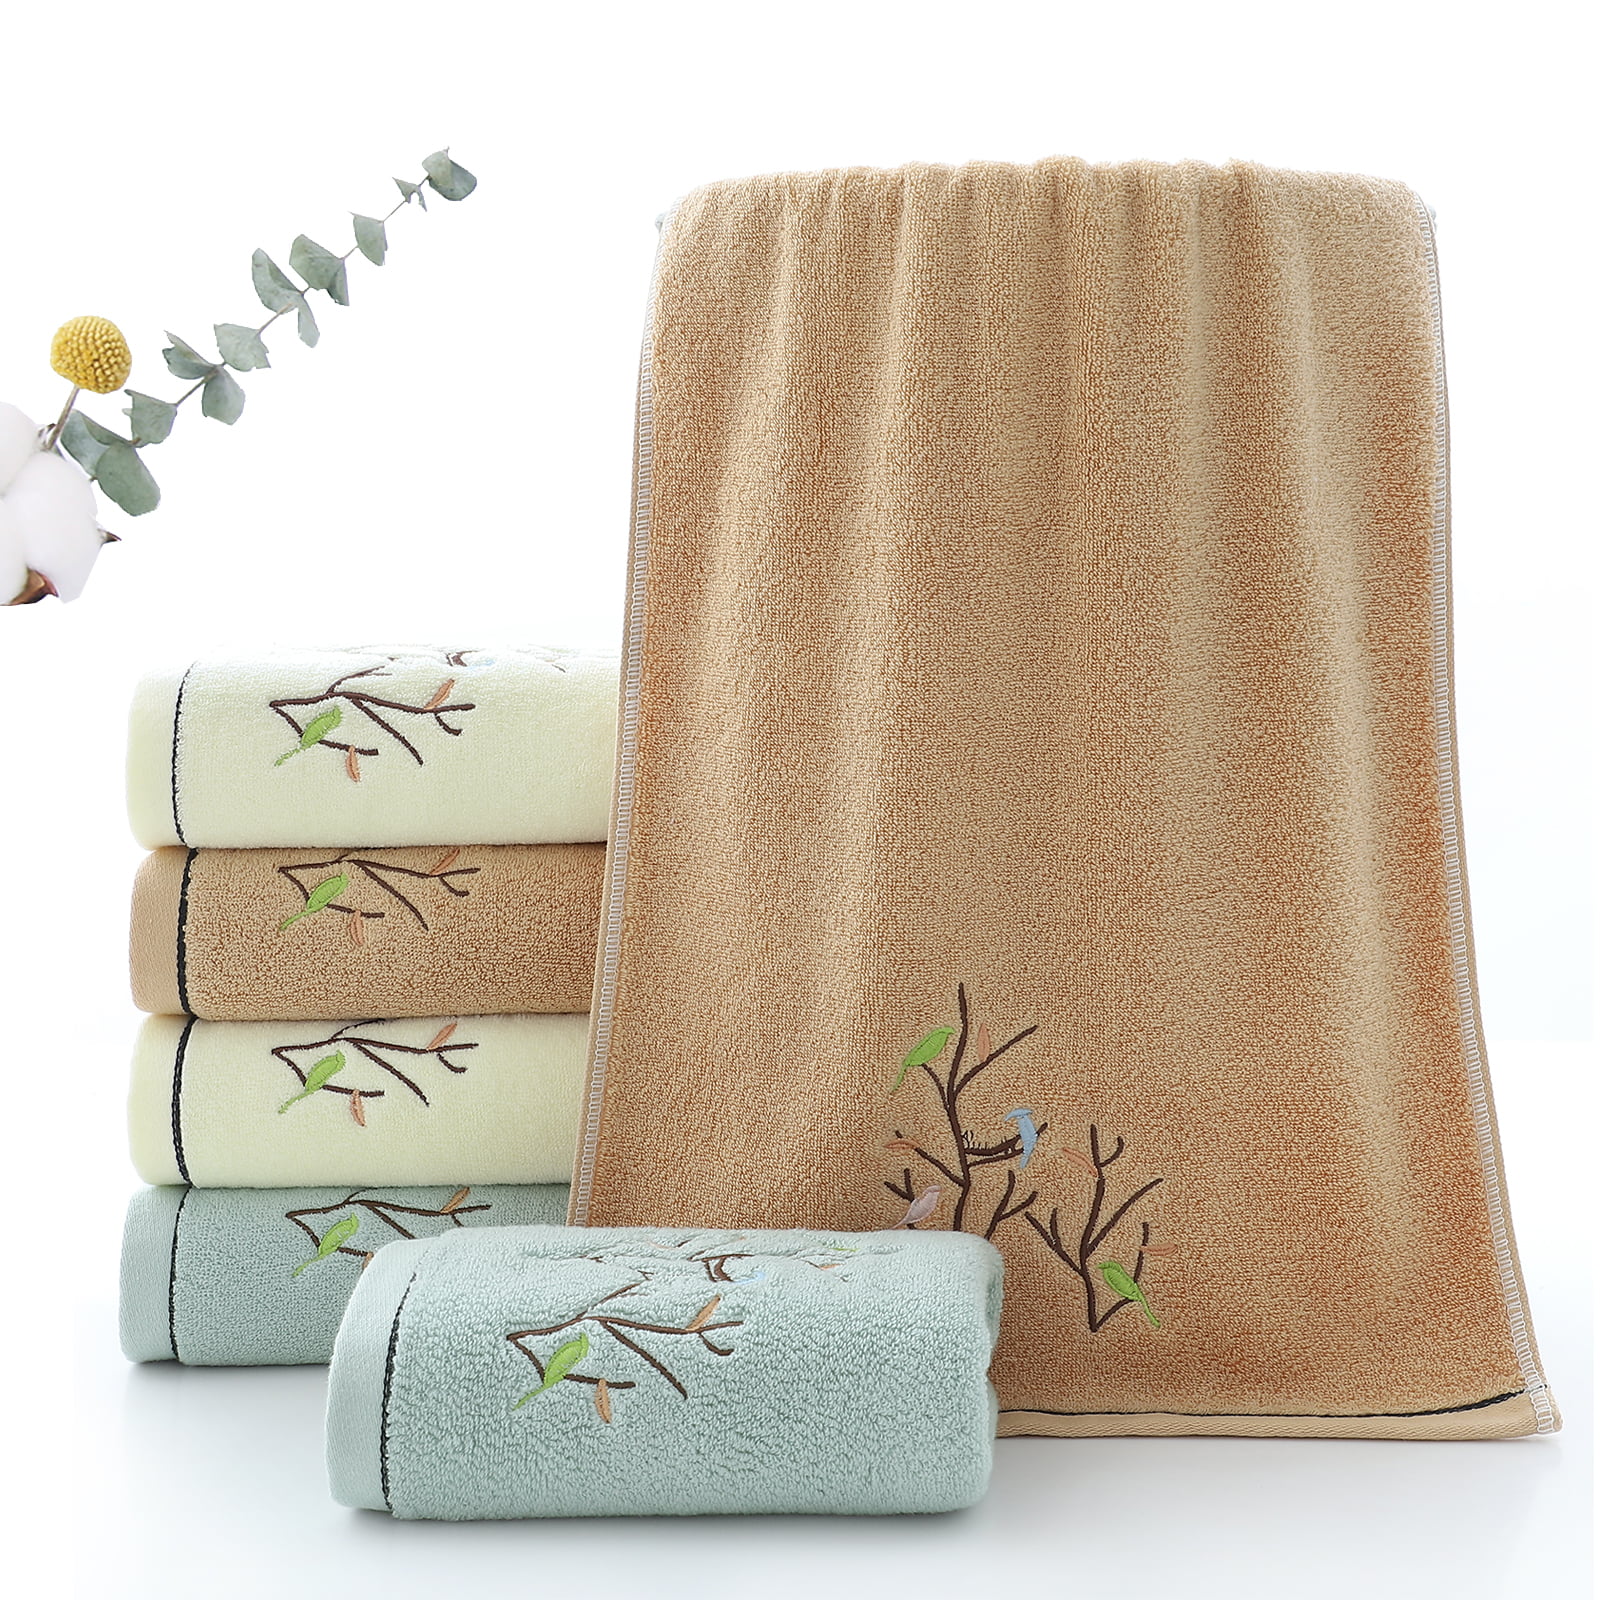 Pidada Bath Hand Towel Set of 3 Embroidered Bird Tree Pattern 100% Cotton  Soft Absorbent Decorative Towels for Bathroom (Light Yellow)